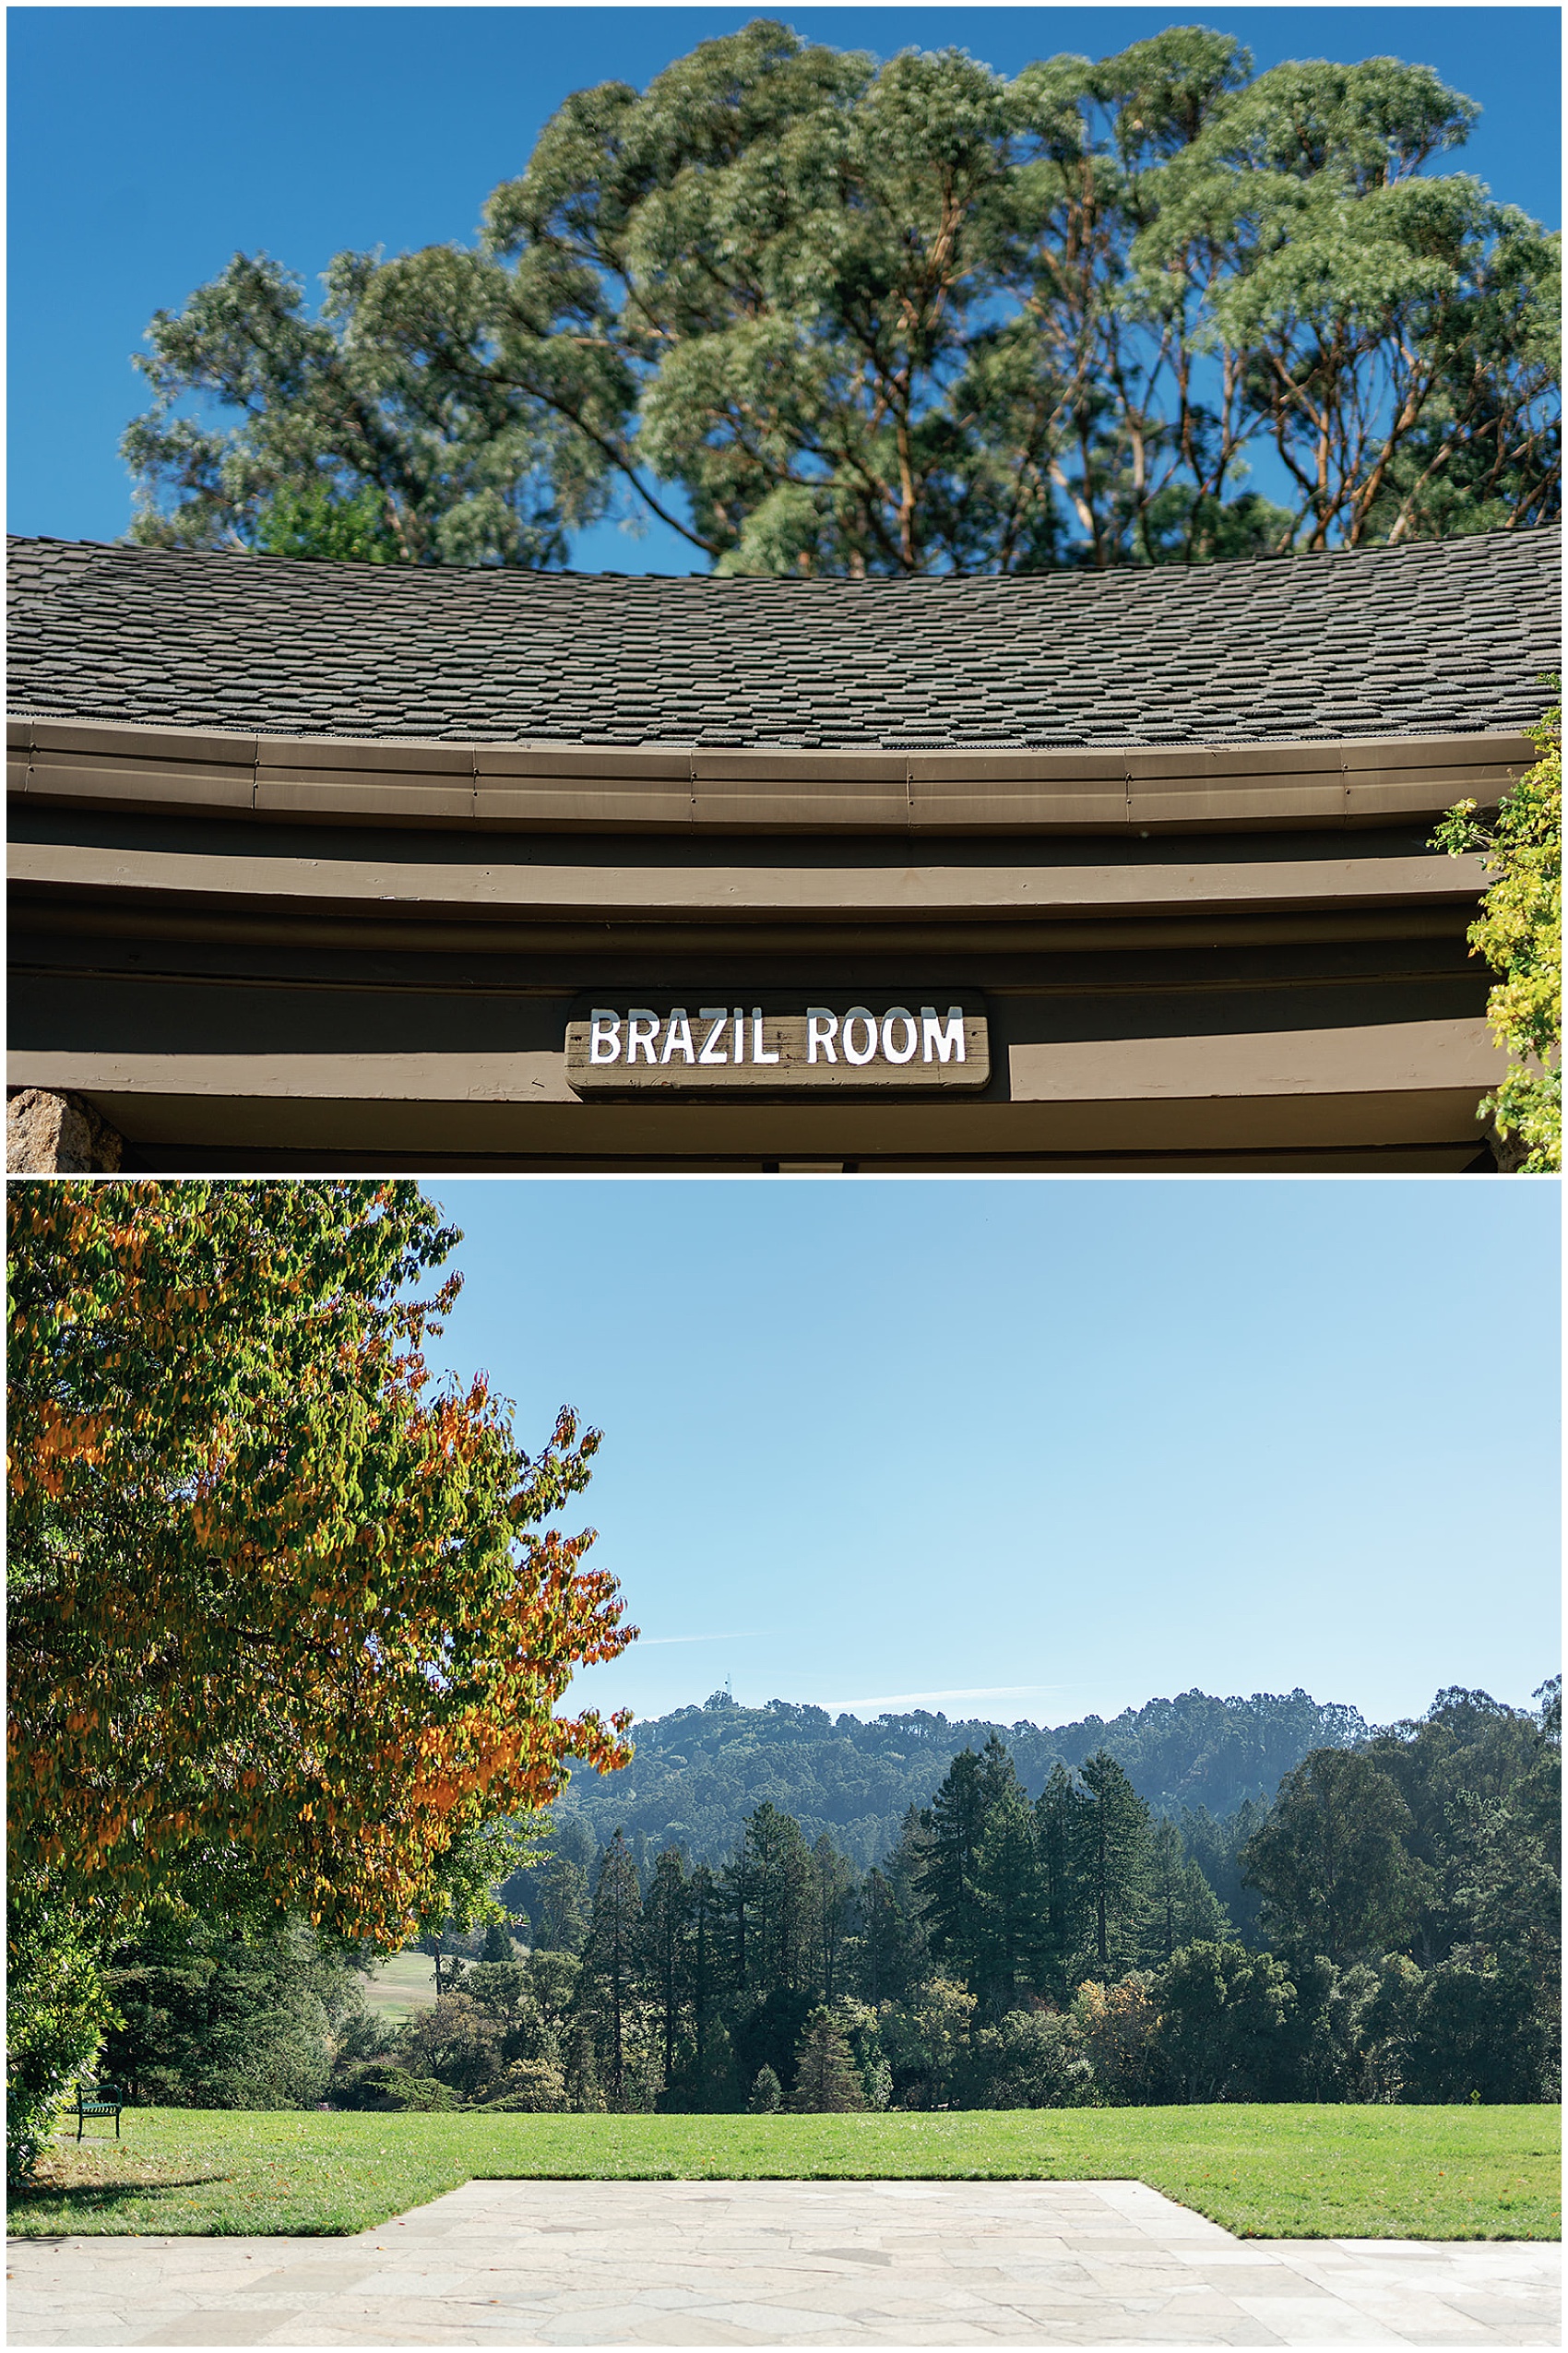 Details of the front entrance and view from the brazilian room tilden park wedding venue